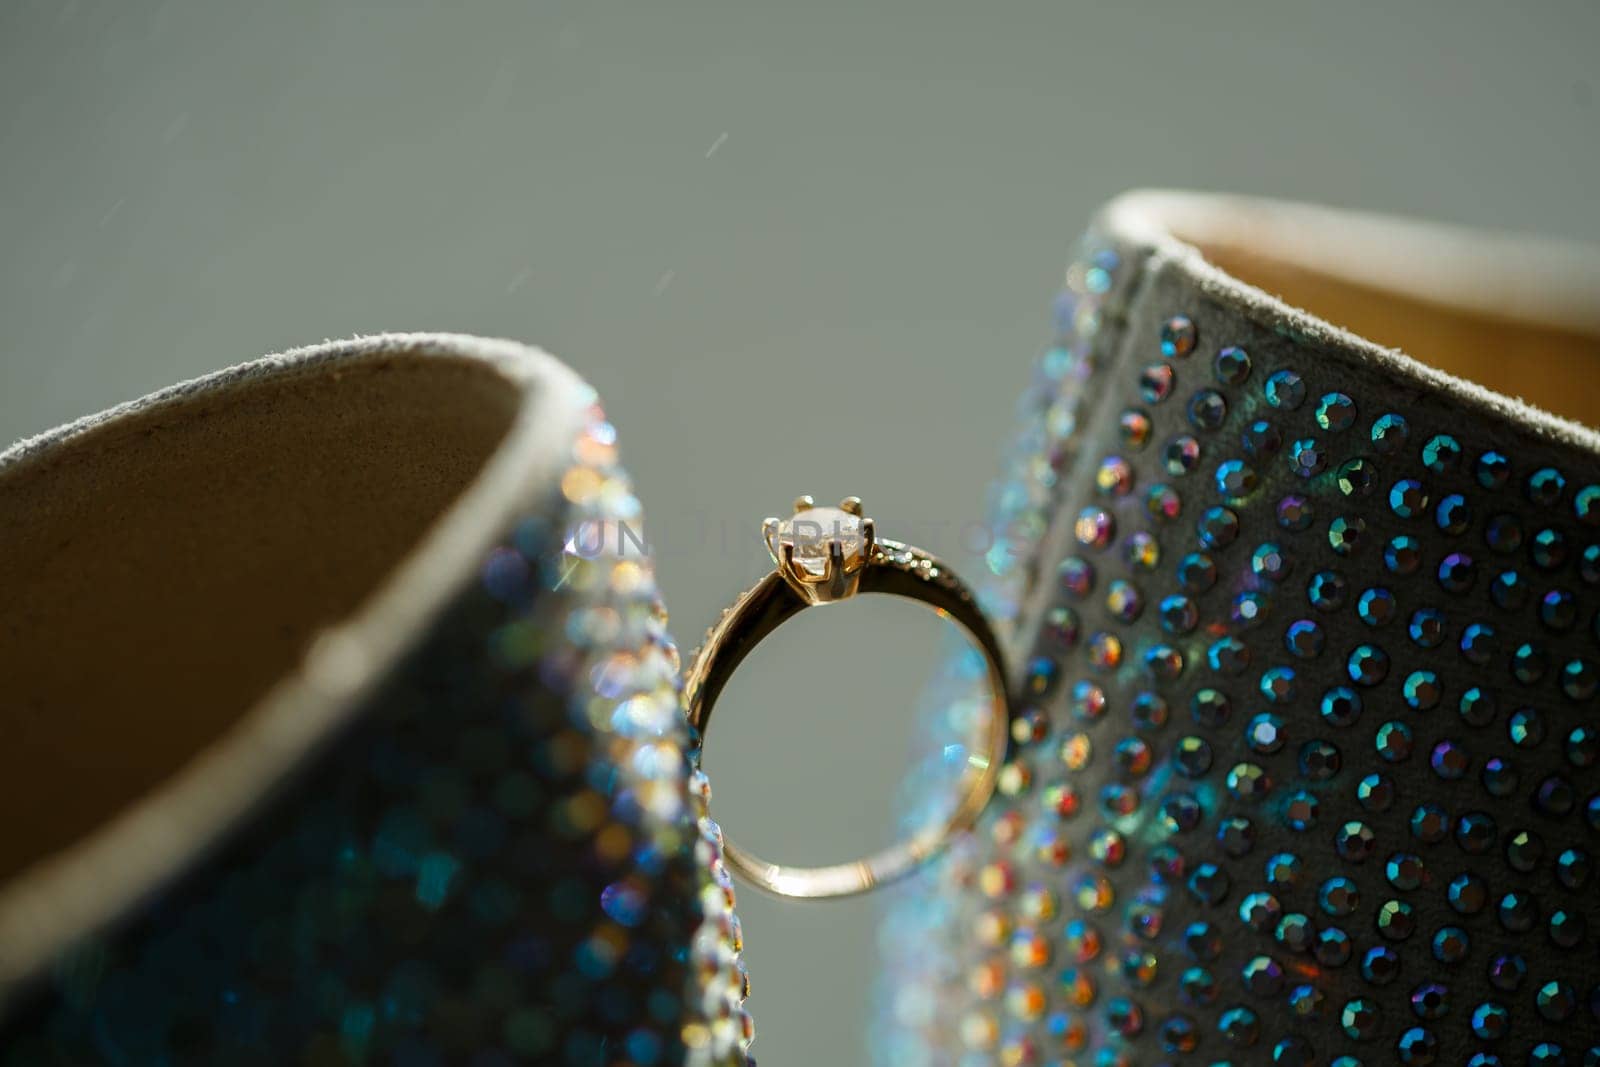 Gold ring of the bride with a pebble between white shoes with heels. Bride's precious ring